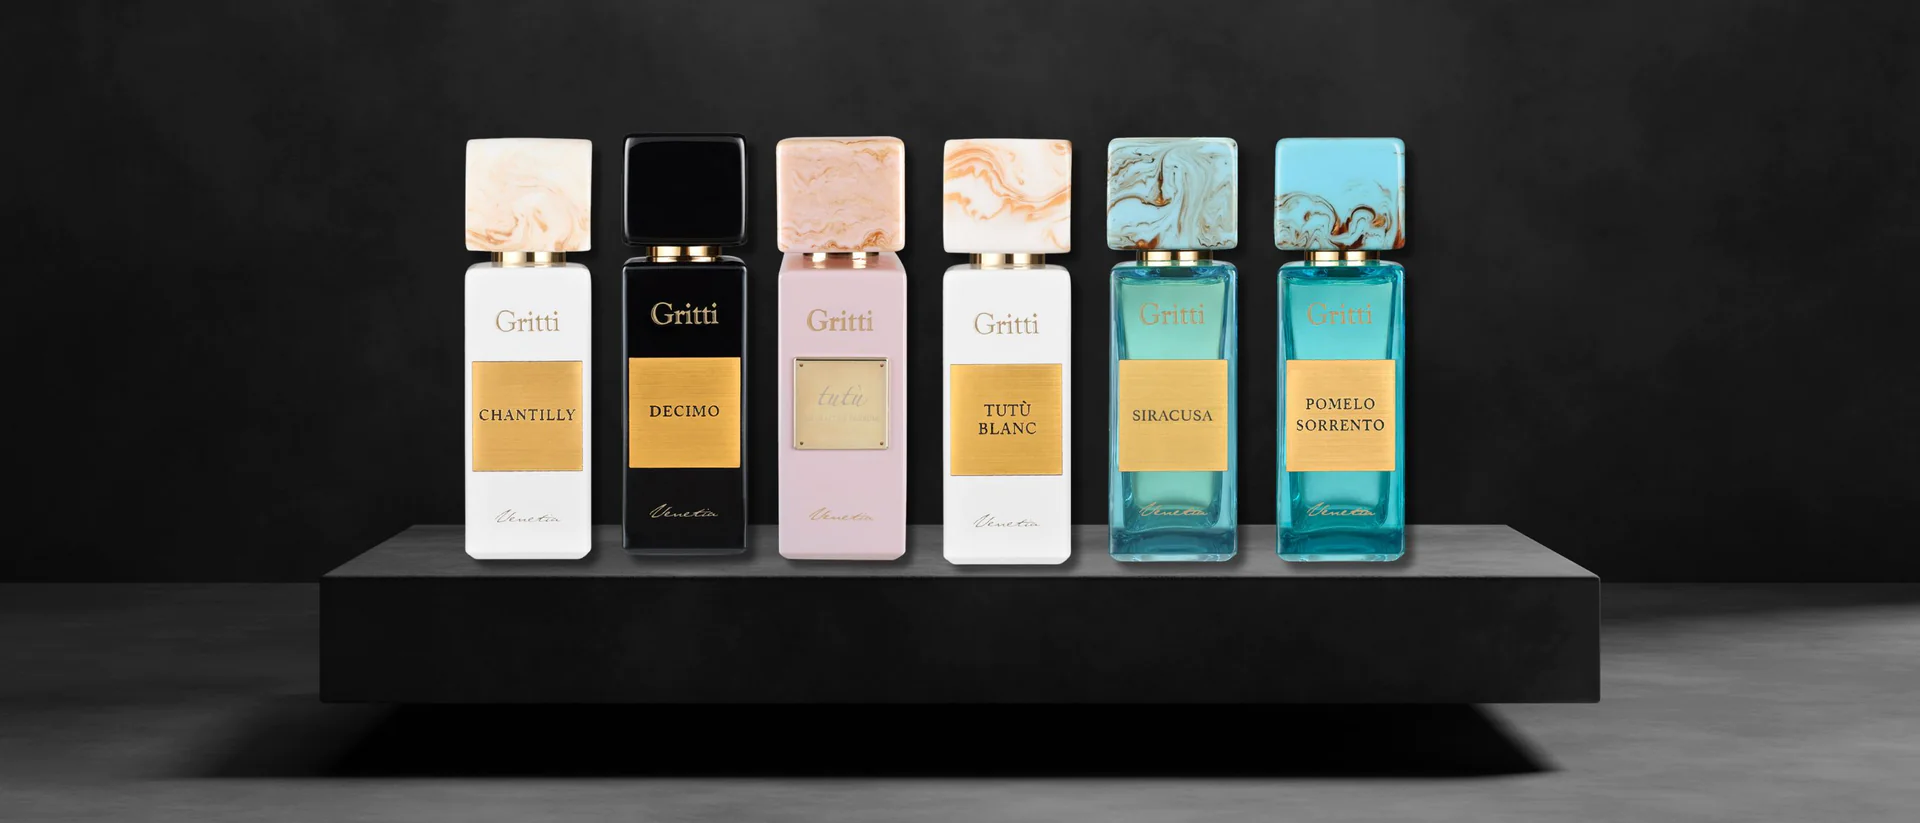 Double Attack Perfume: The Unconventional Fragrance Trend Taking the World by Storm